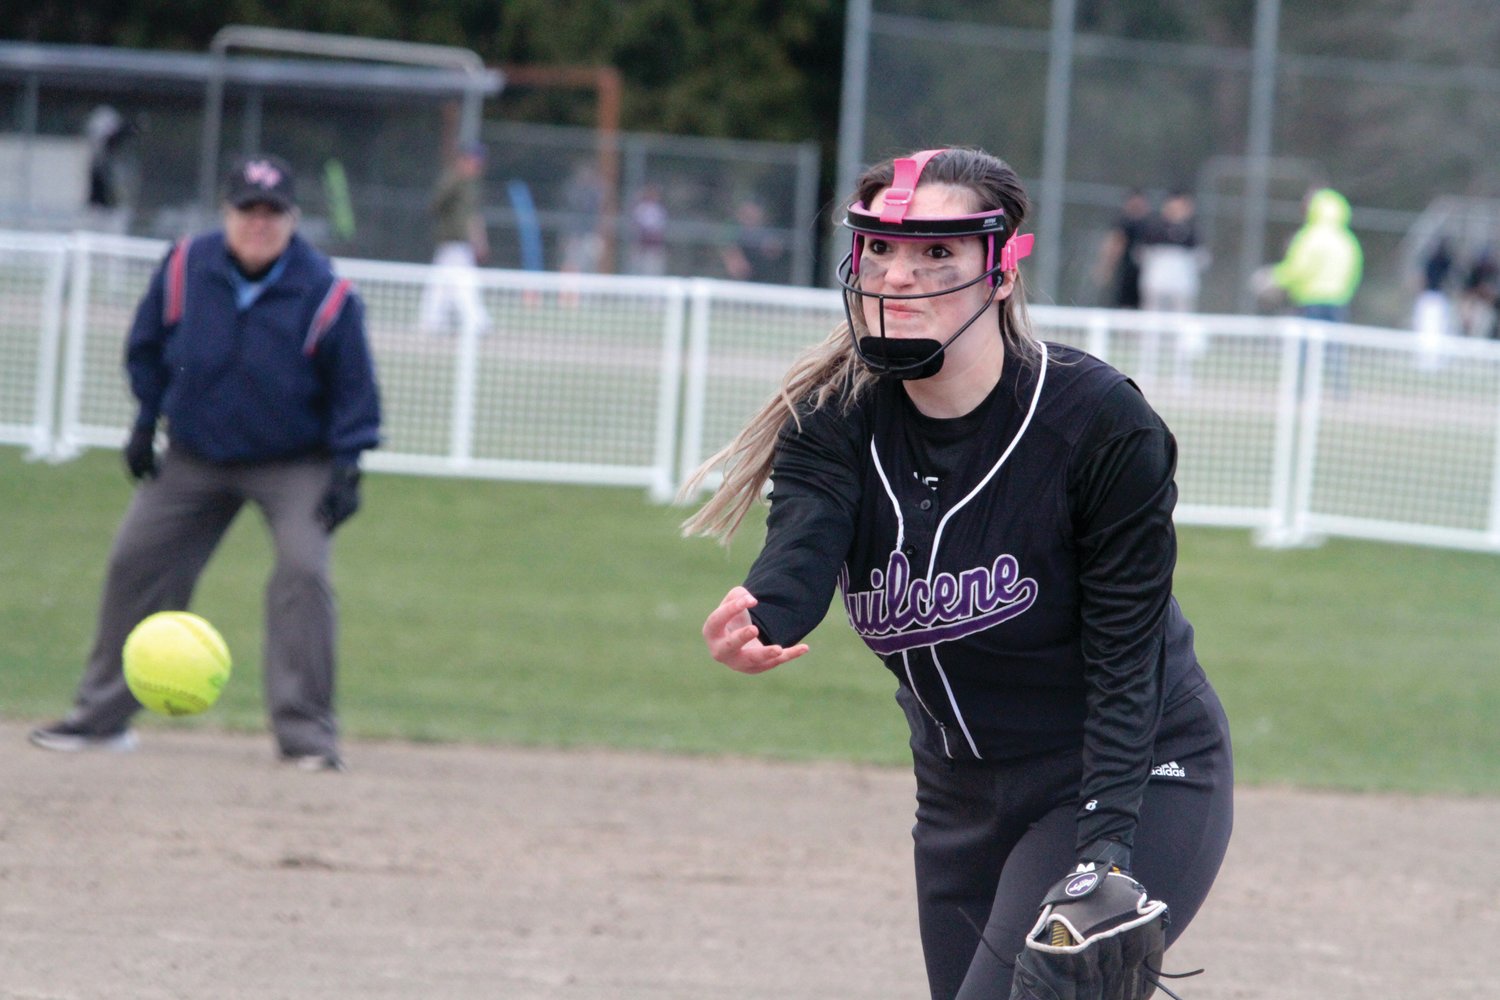 Kayla Ward fires one across the plate during the Rangers’ 10-0 win. She struck out eight Logger batters during the game.